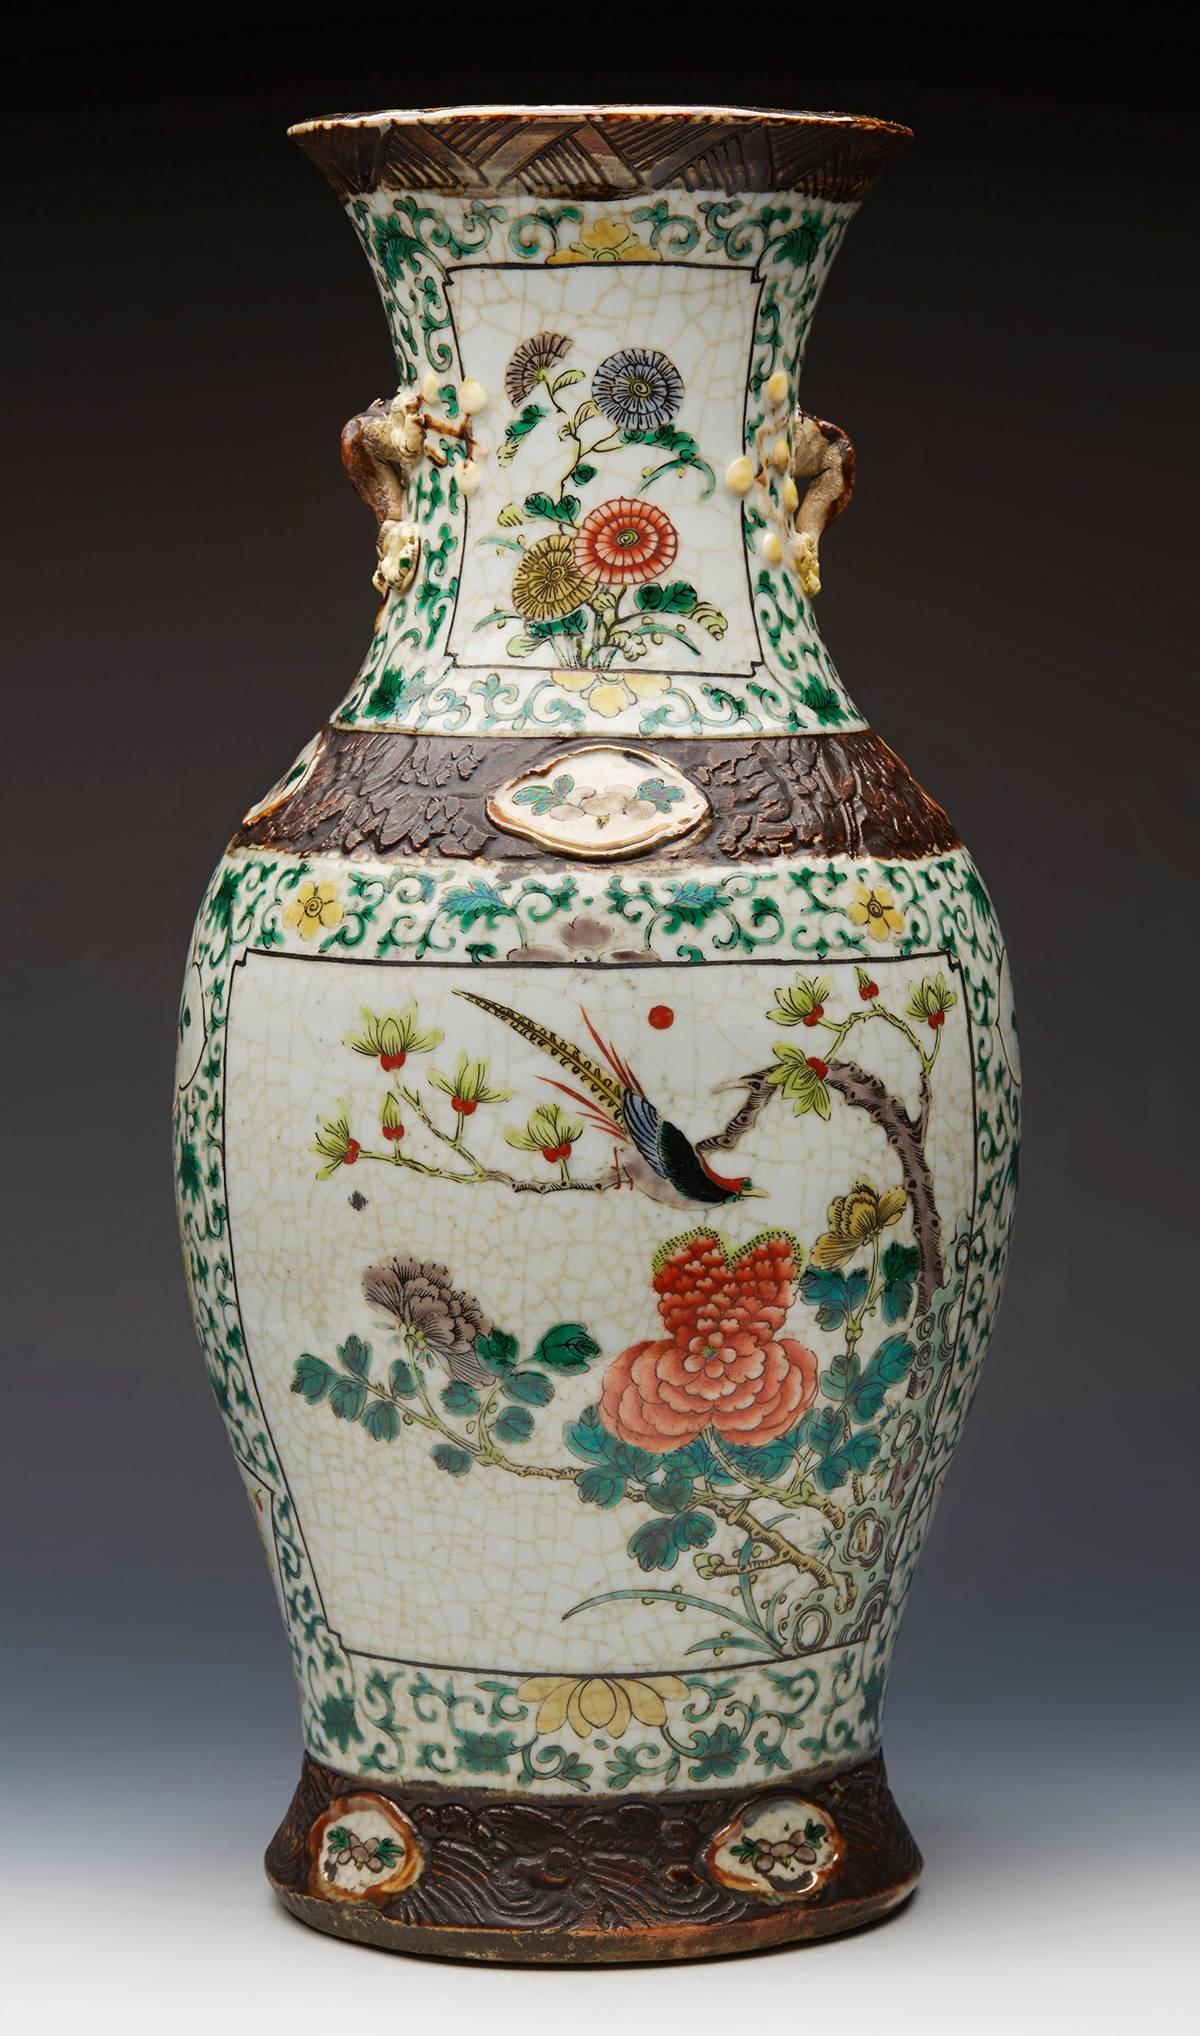 A fine and large antique Chinese hand-painted famille verte cracquel ware vase of baluster shape with moulded brown glazed borders. The body of the vase finely hand-painted with panels with exotic birds set amidst flowering prunus and other shrubs